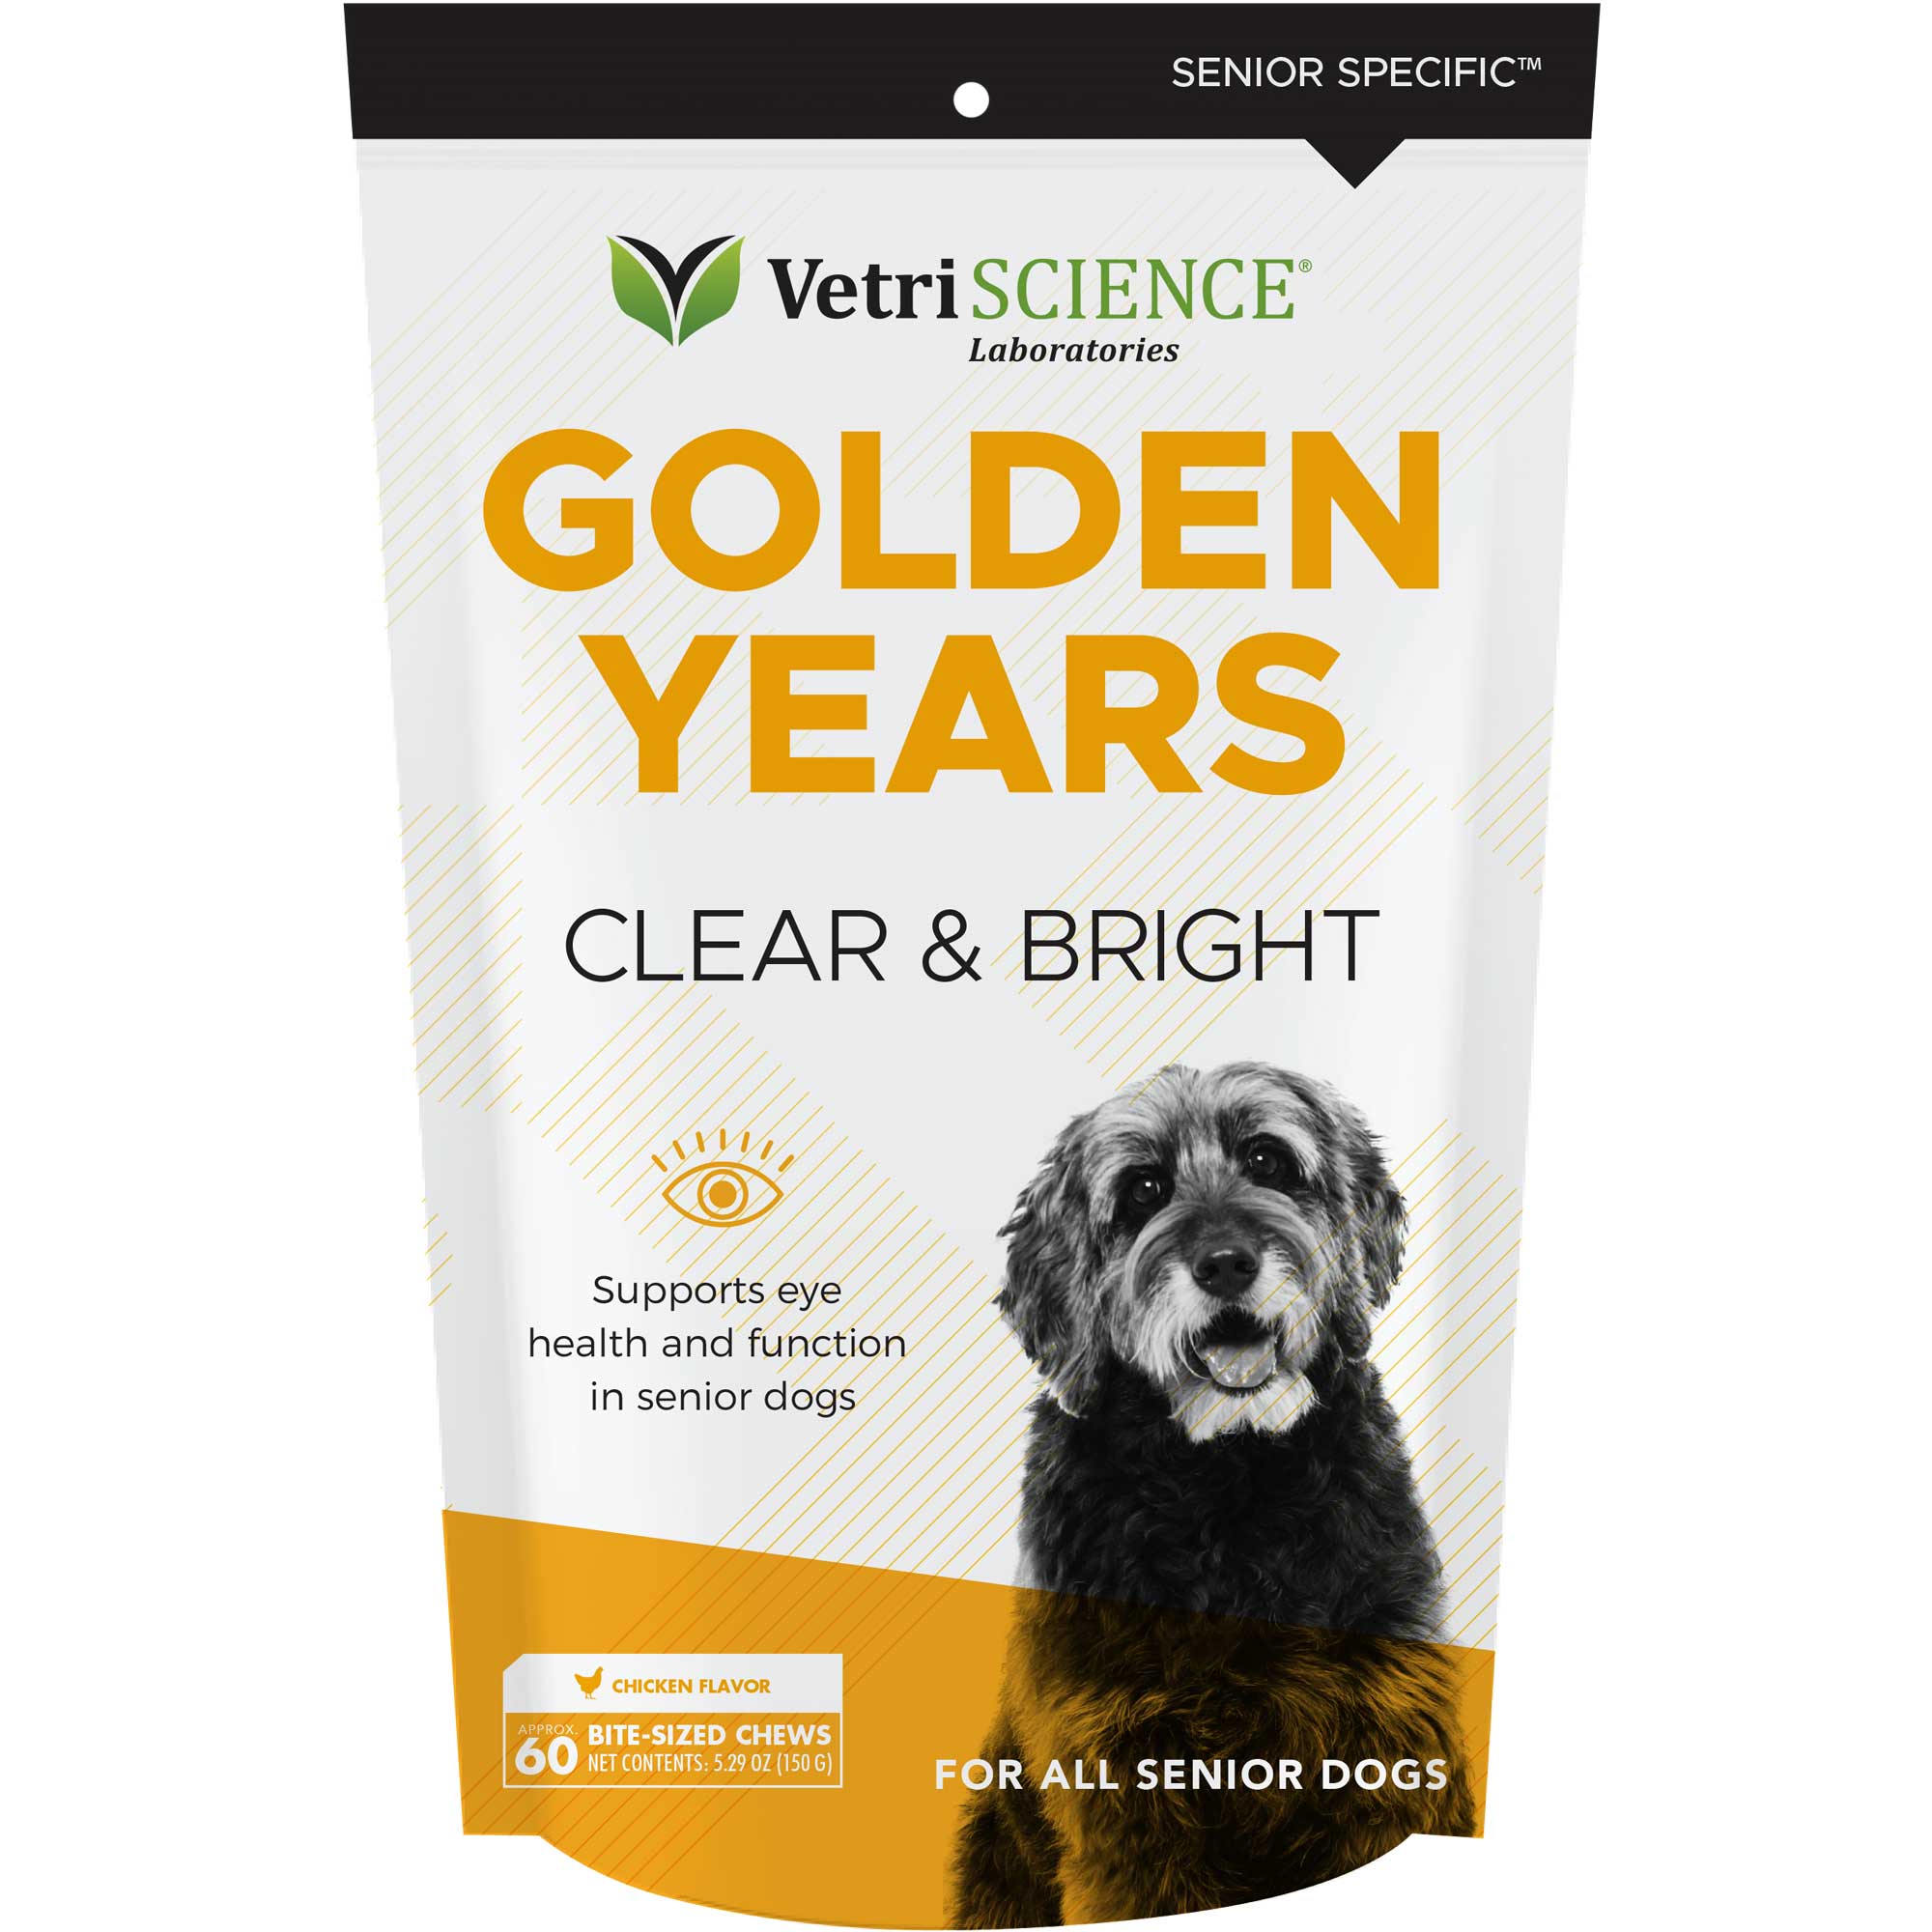 Golden Years Clear & Bright Chews Usage